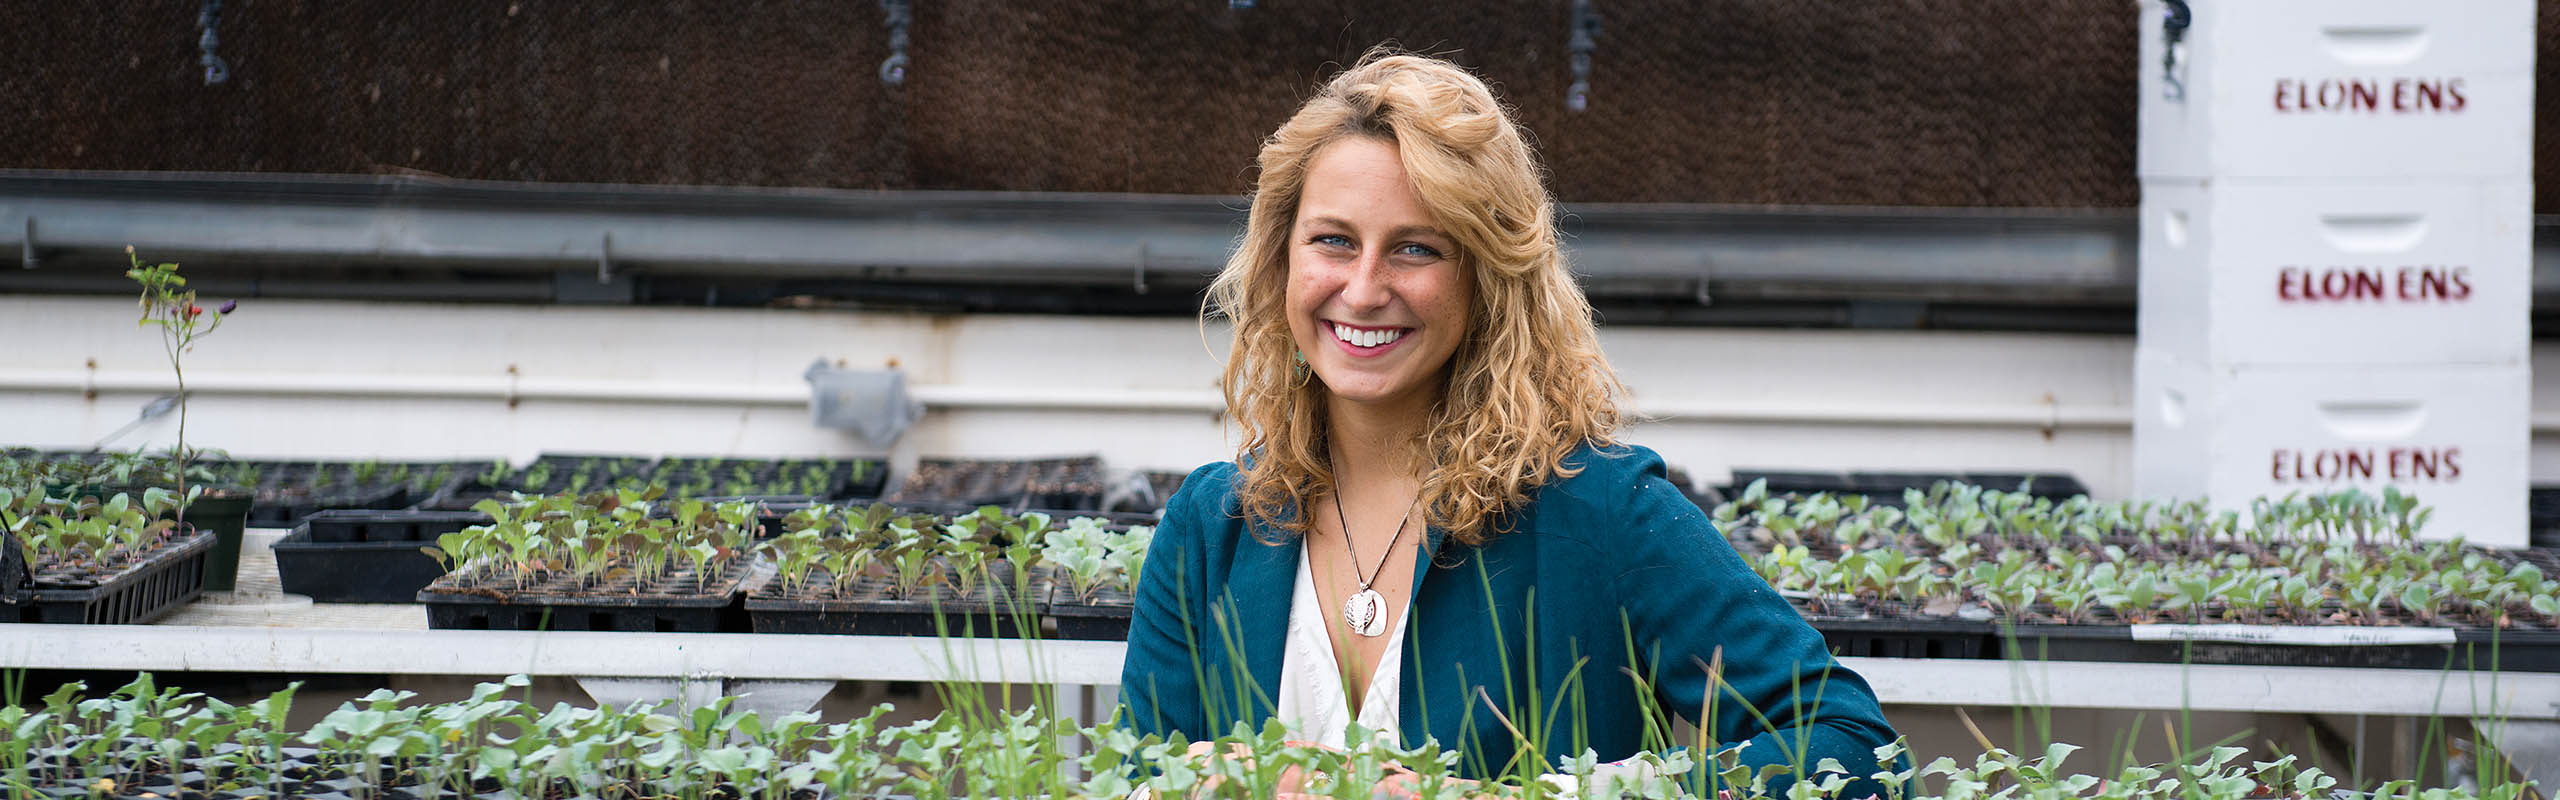 Colby Halligan '15 poses in Elon's greenhouse, with plants that will be sold to raise funds for Elon's Community Garden.